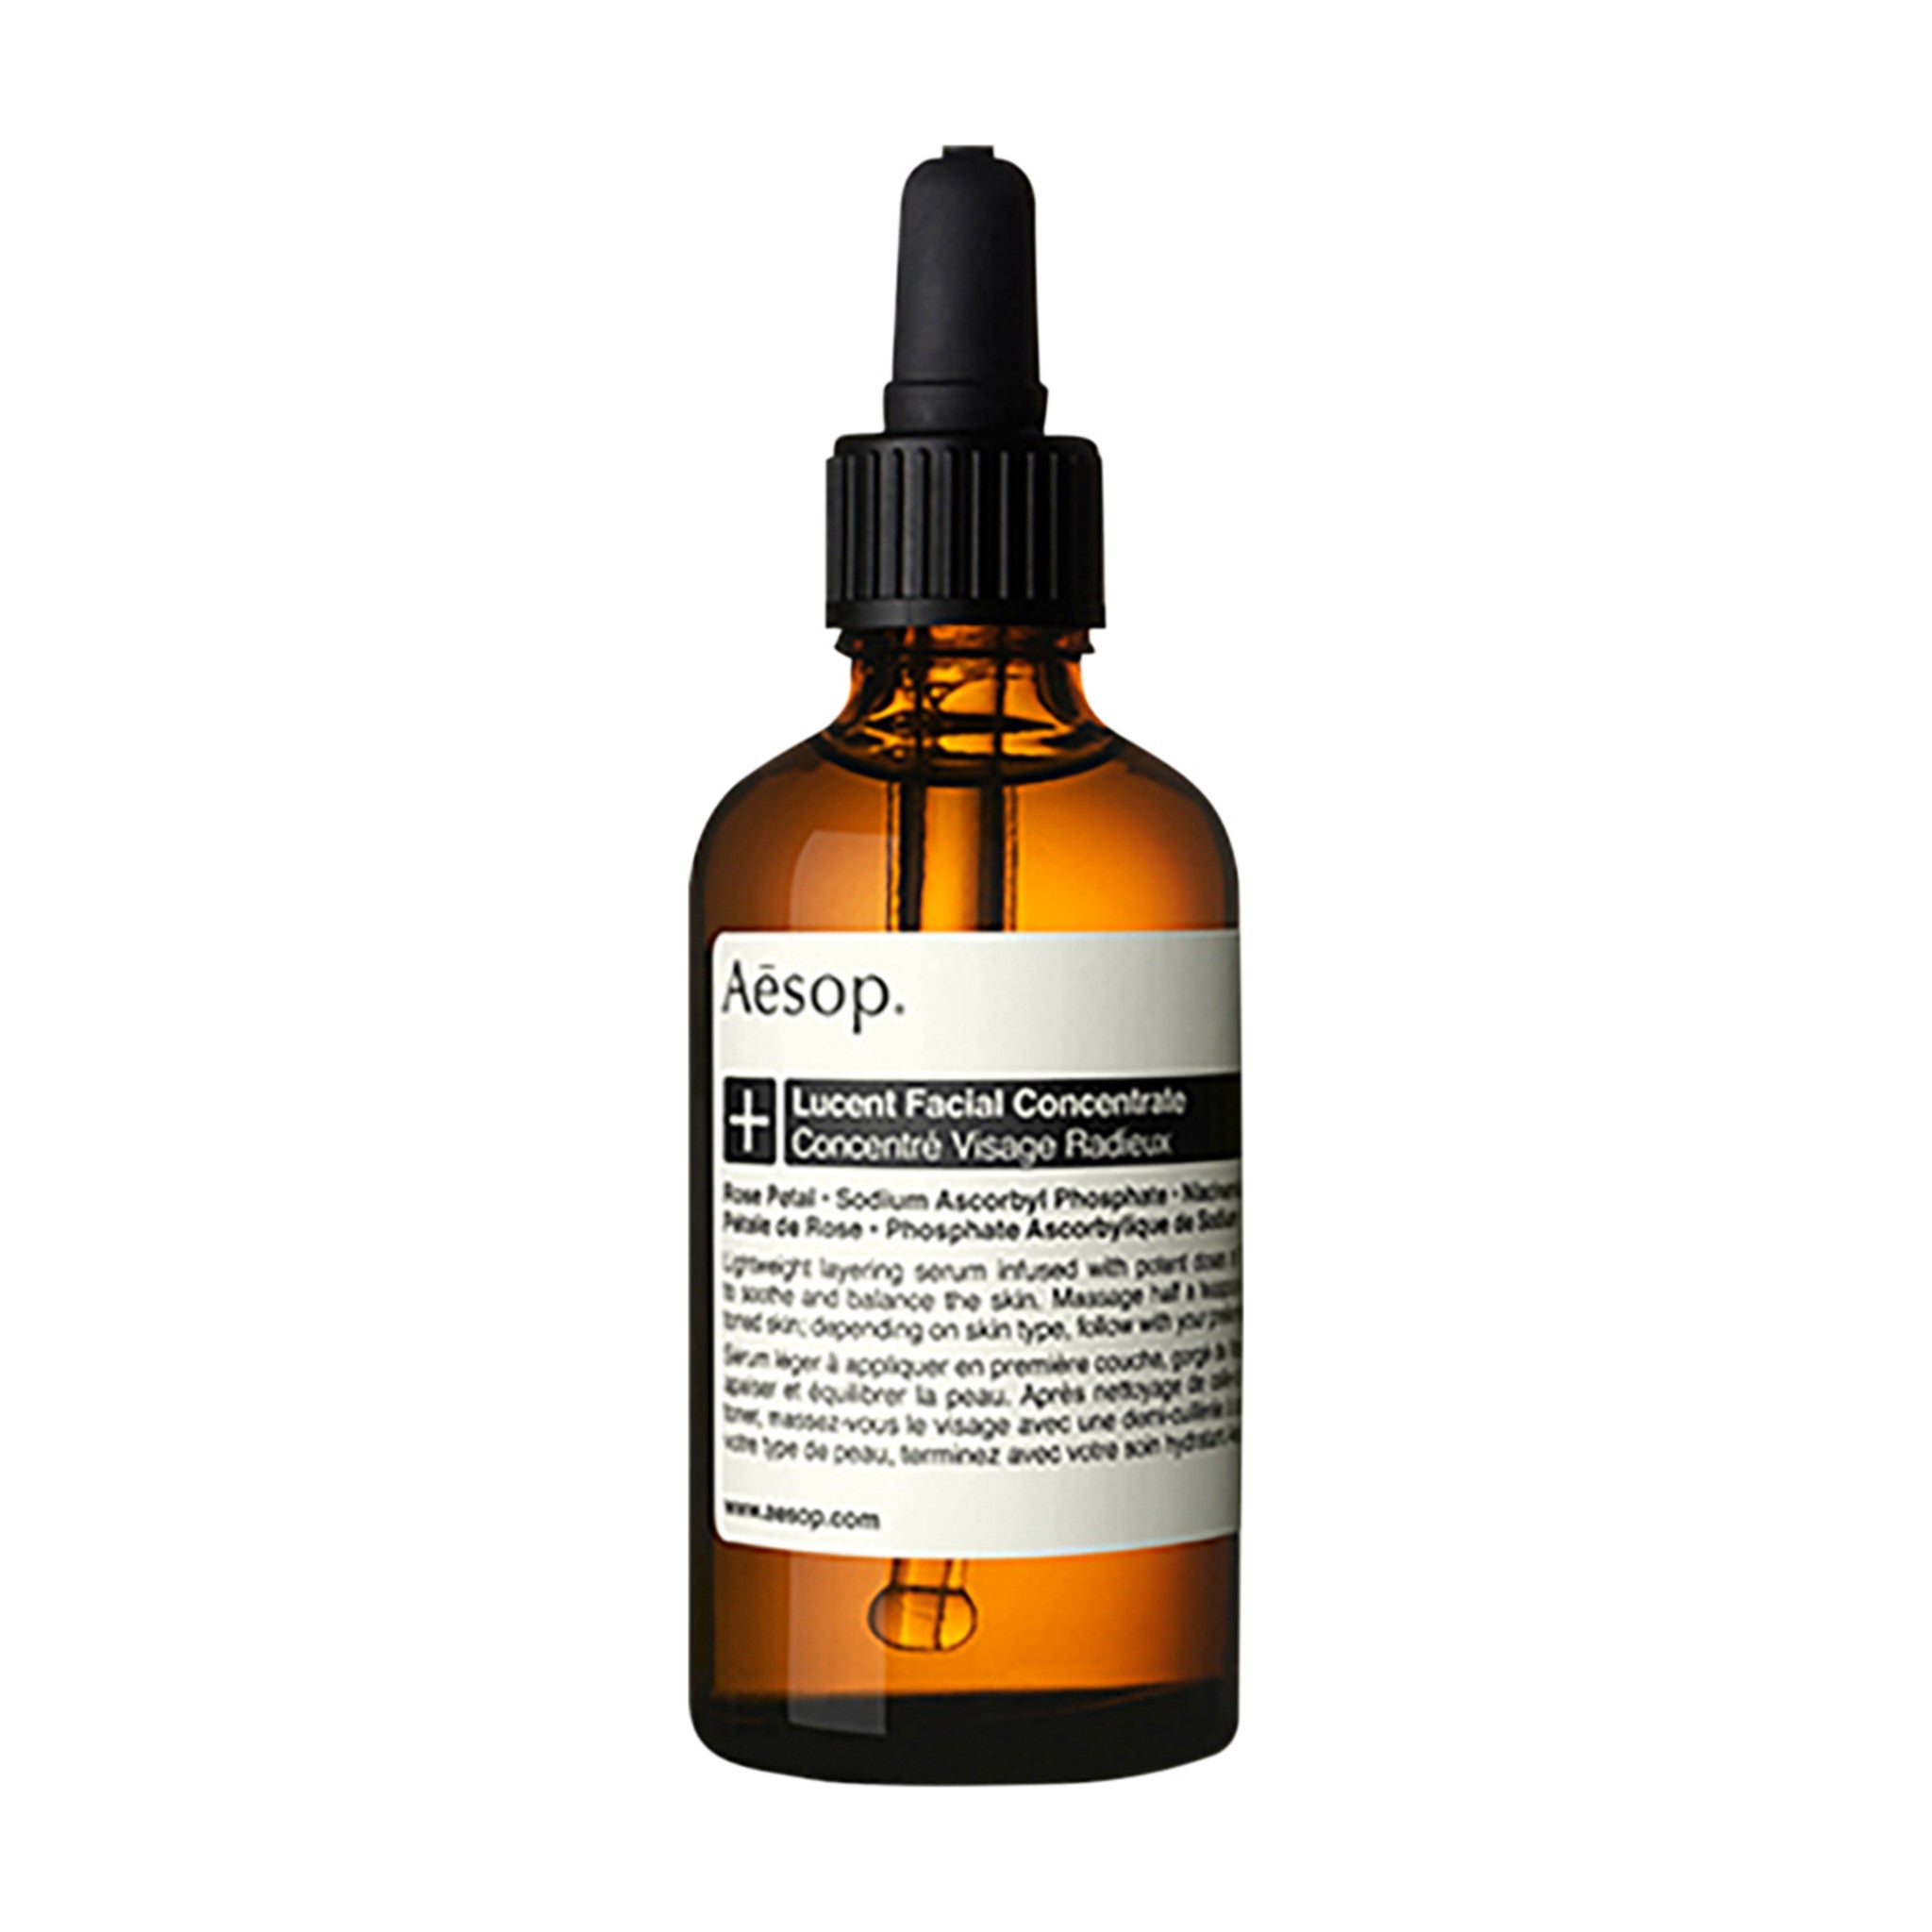 Aesop Lucent Facial Concentrate main image.